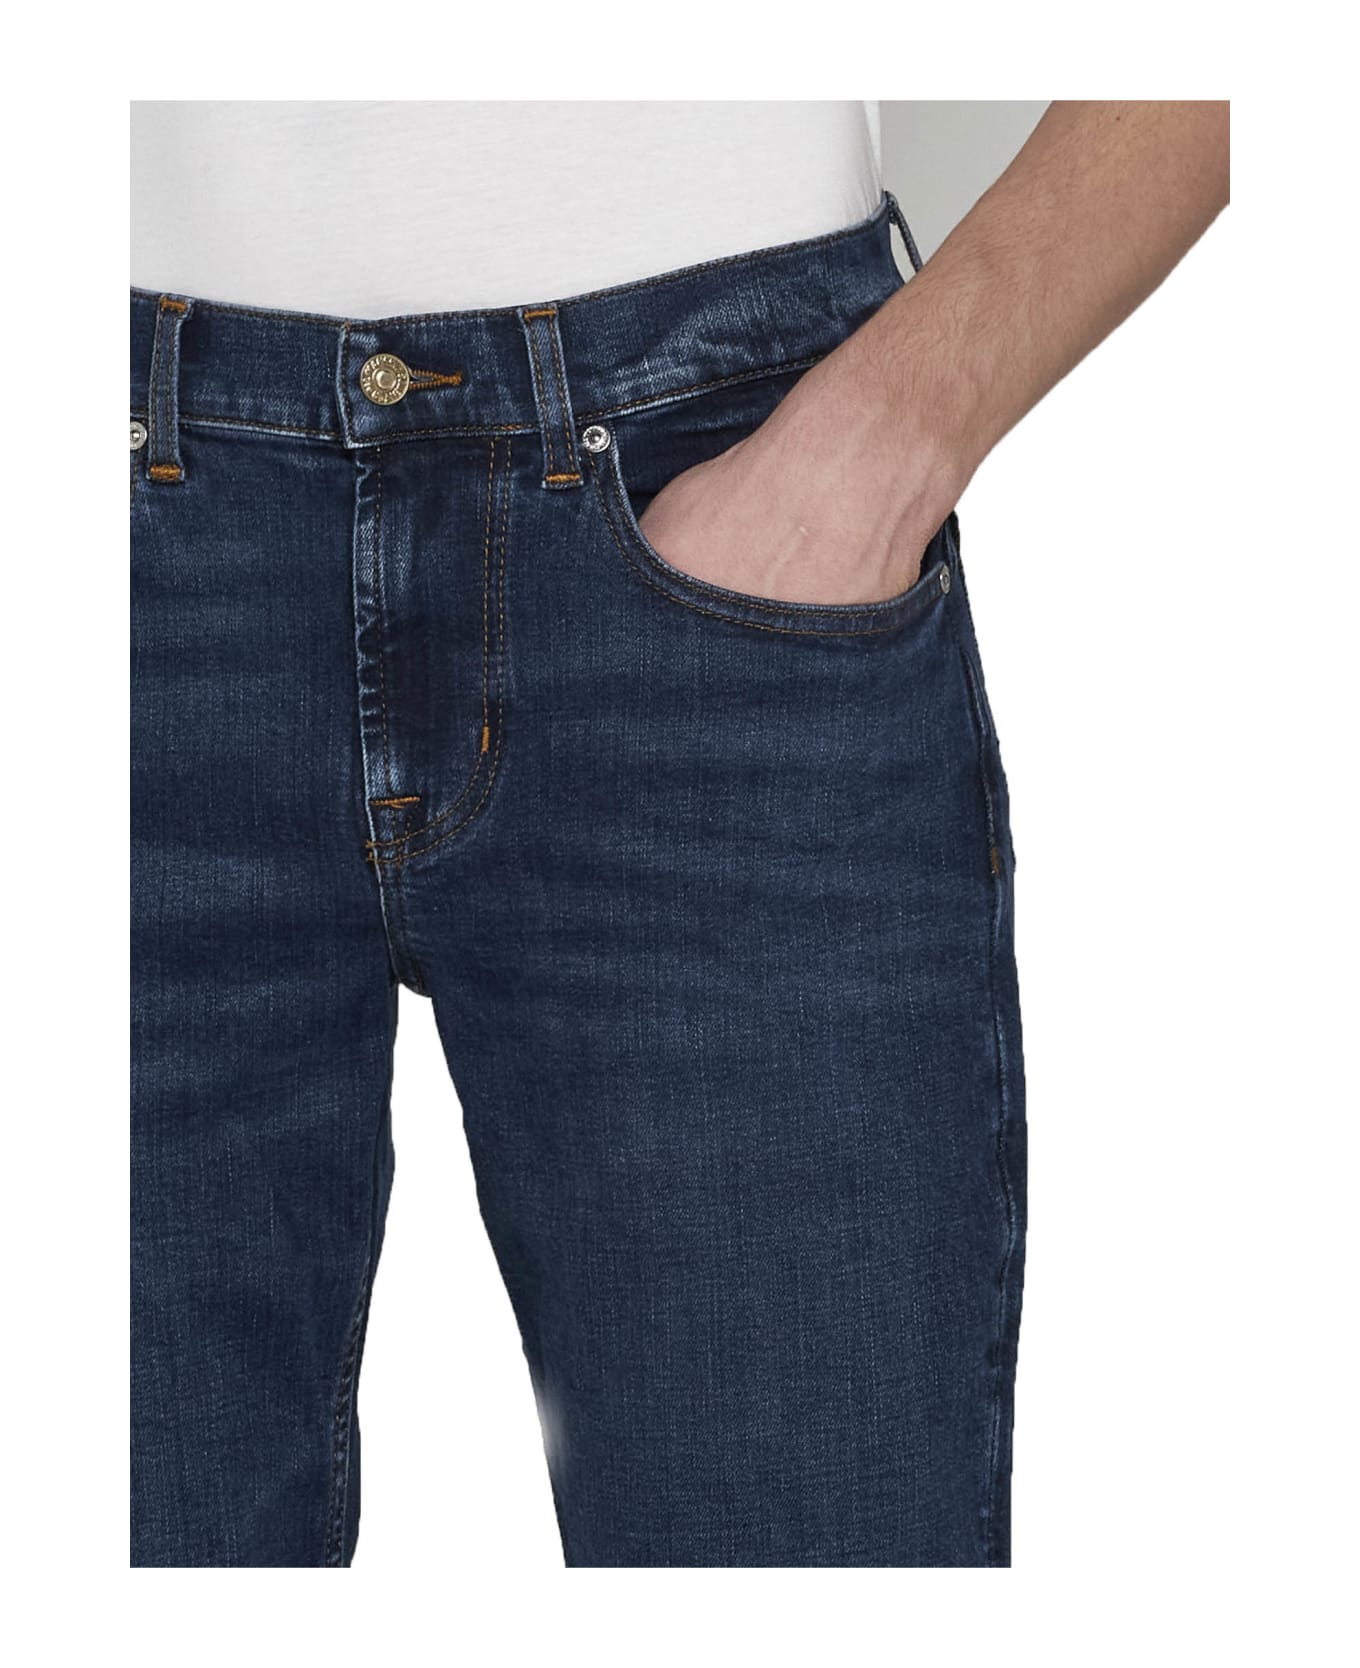 7 For All Mankind Jeans - Dark blue